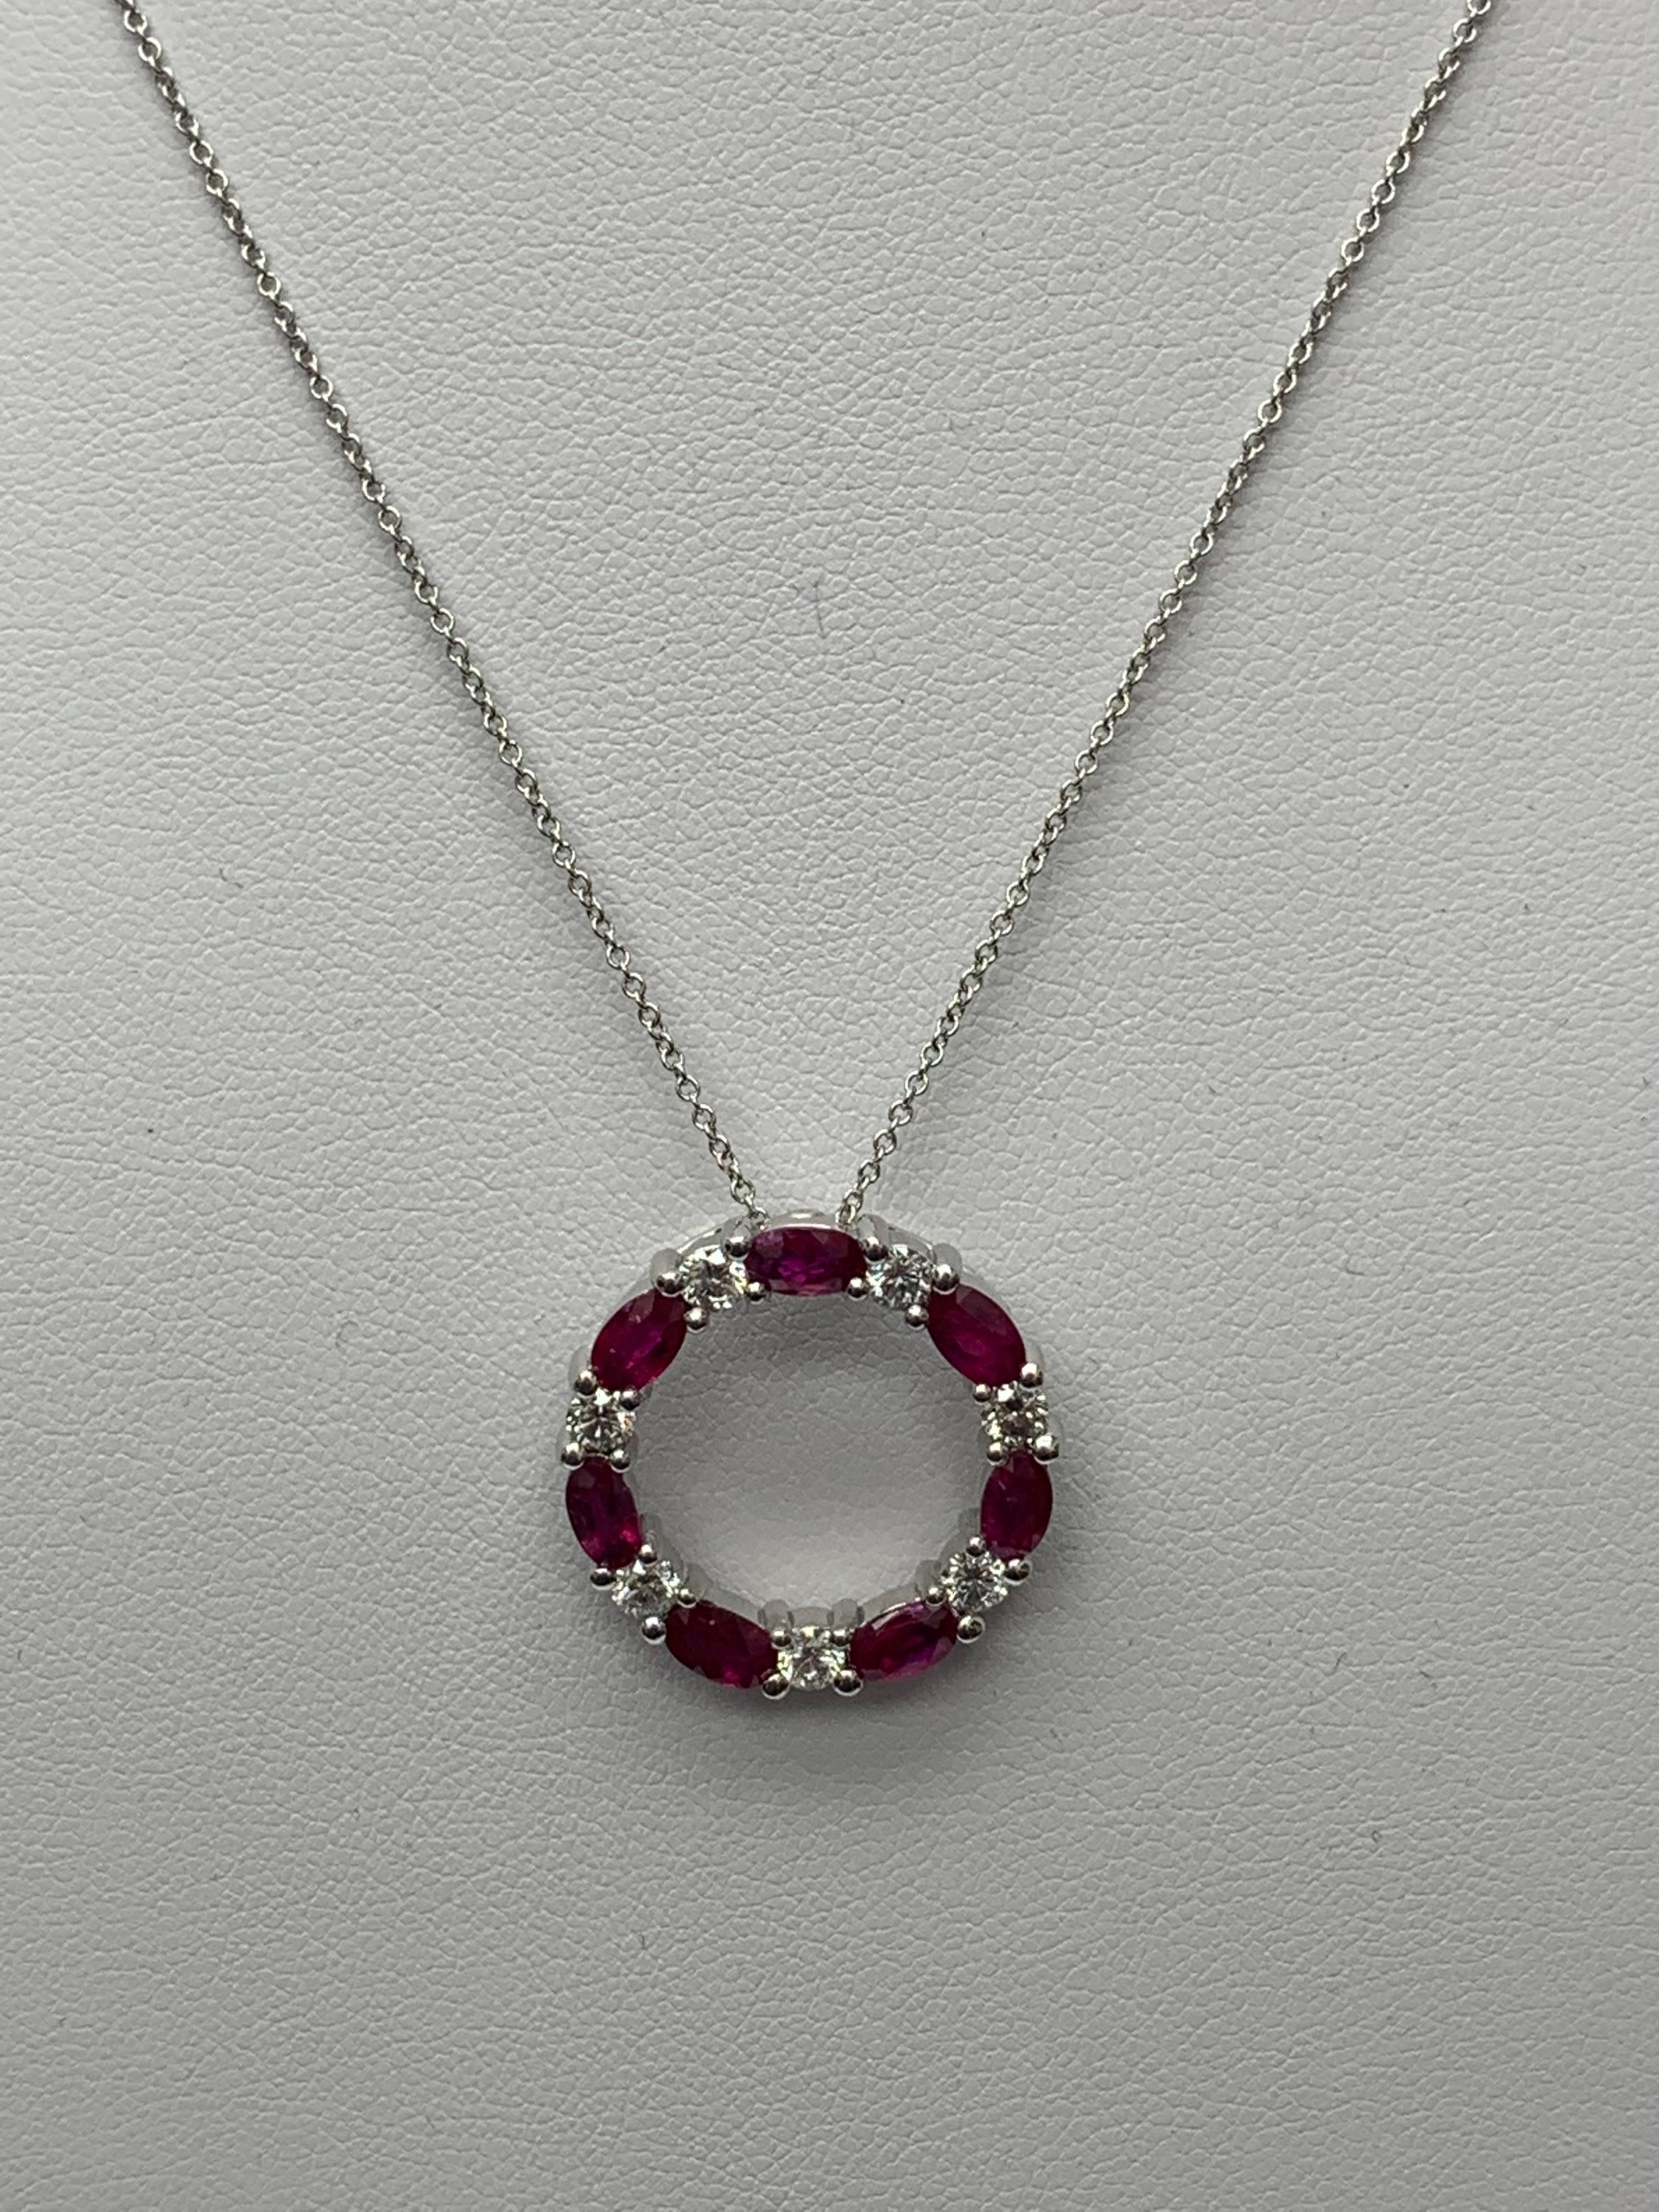 Modern 1.99 Carat Ruby and Diamond Circle Pendant Necklace in 14k White Gold For Sale